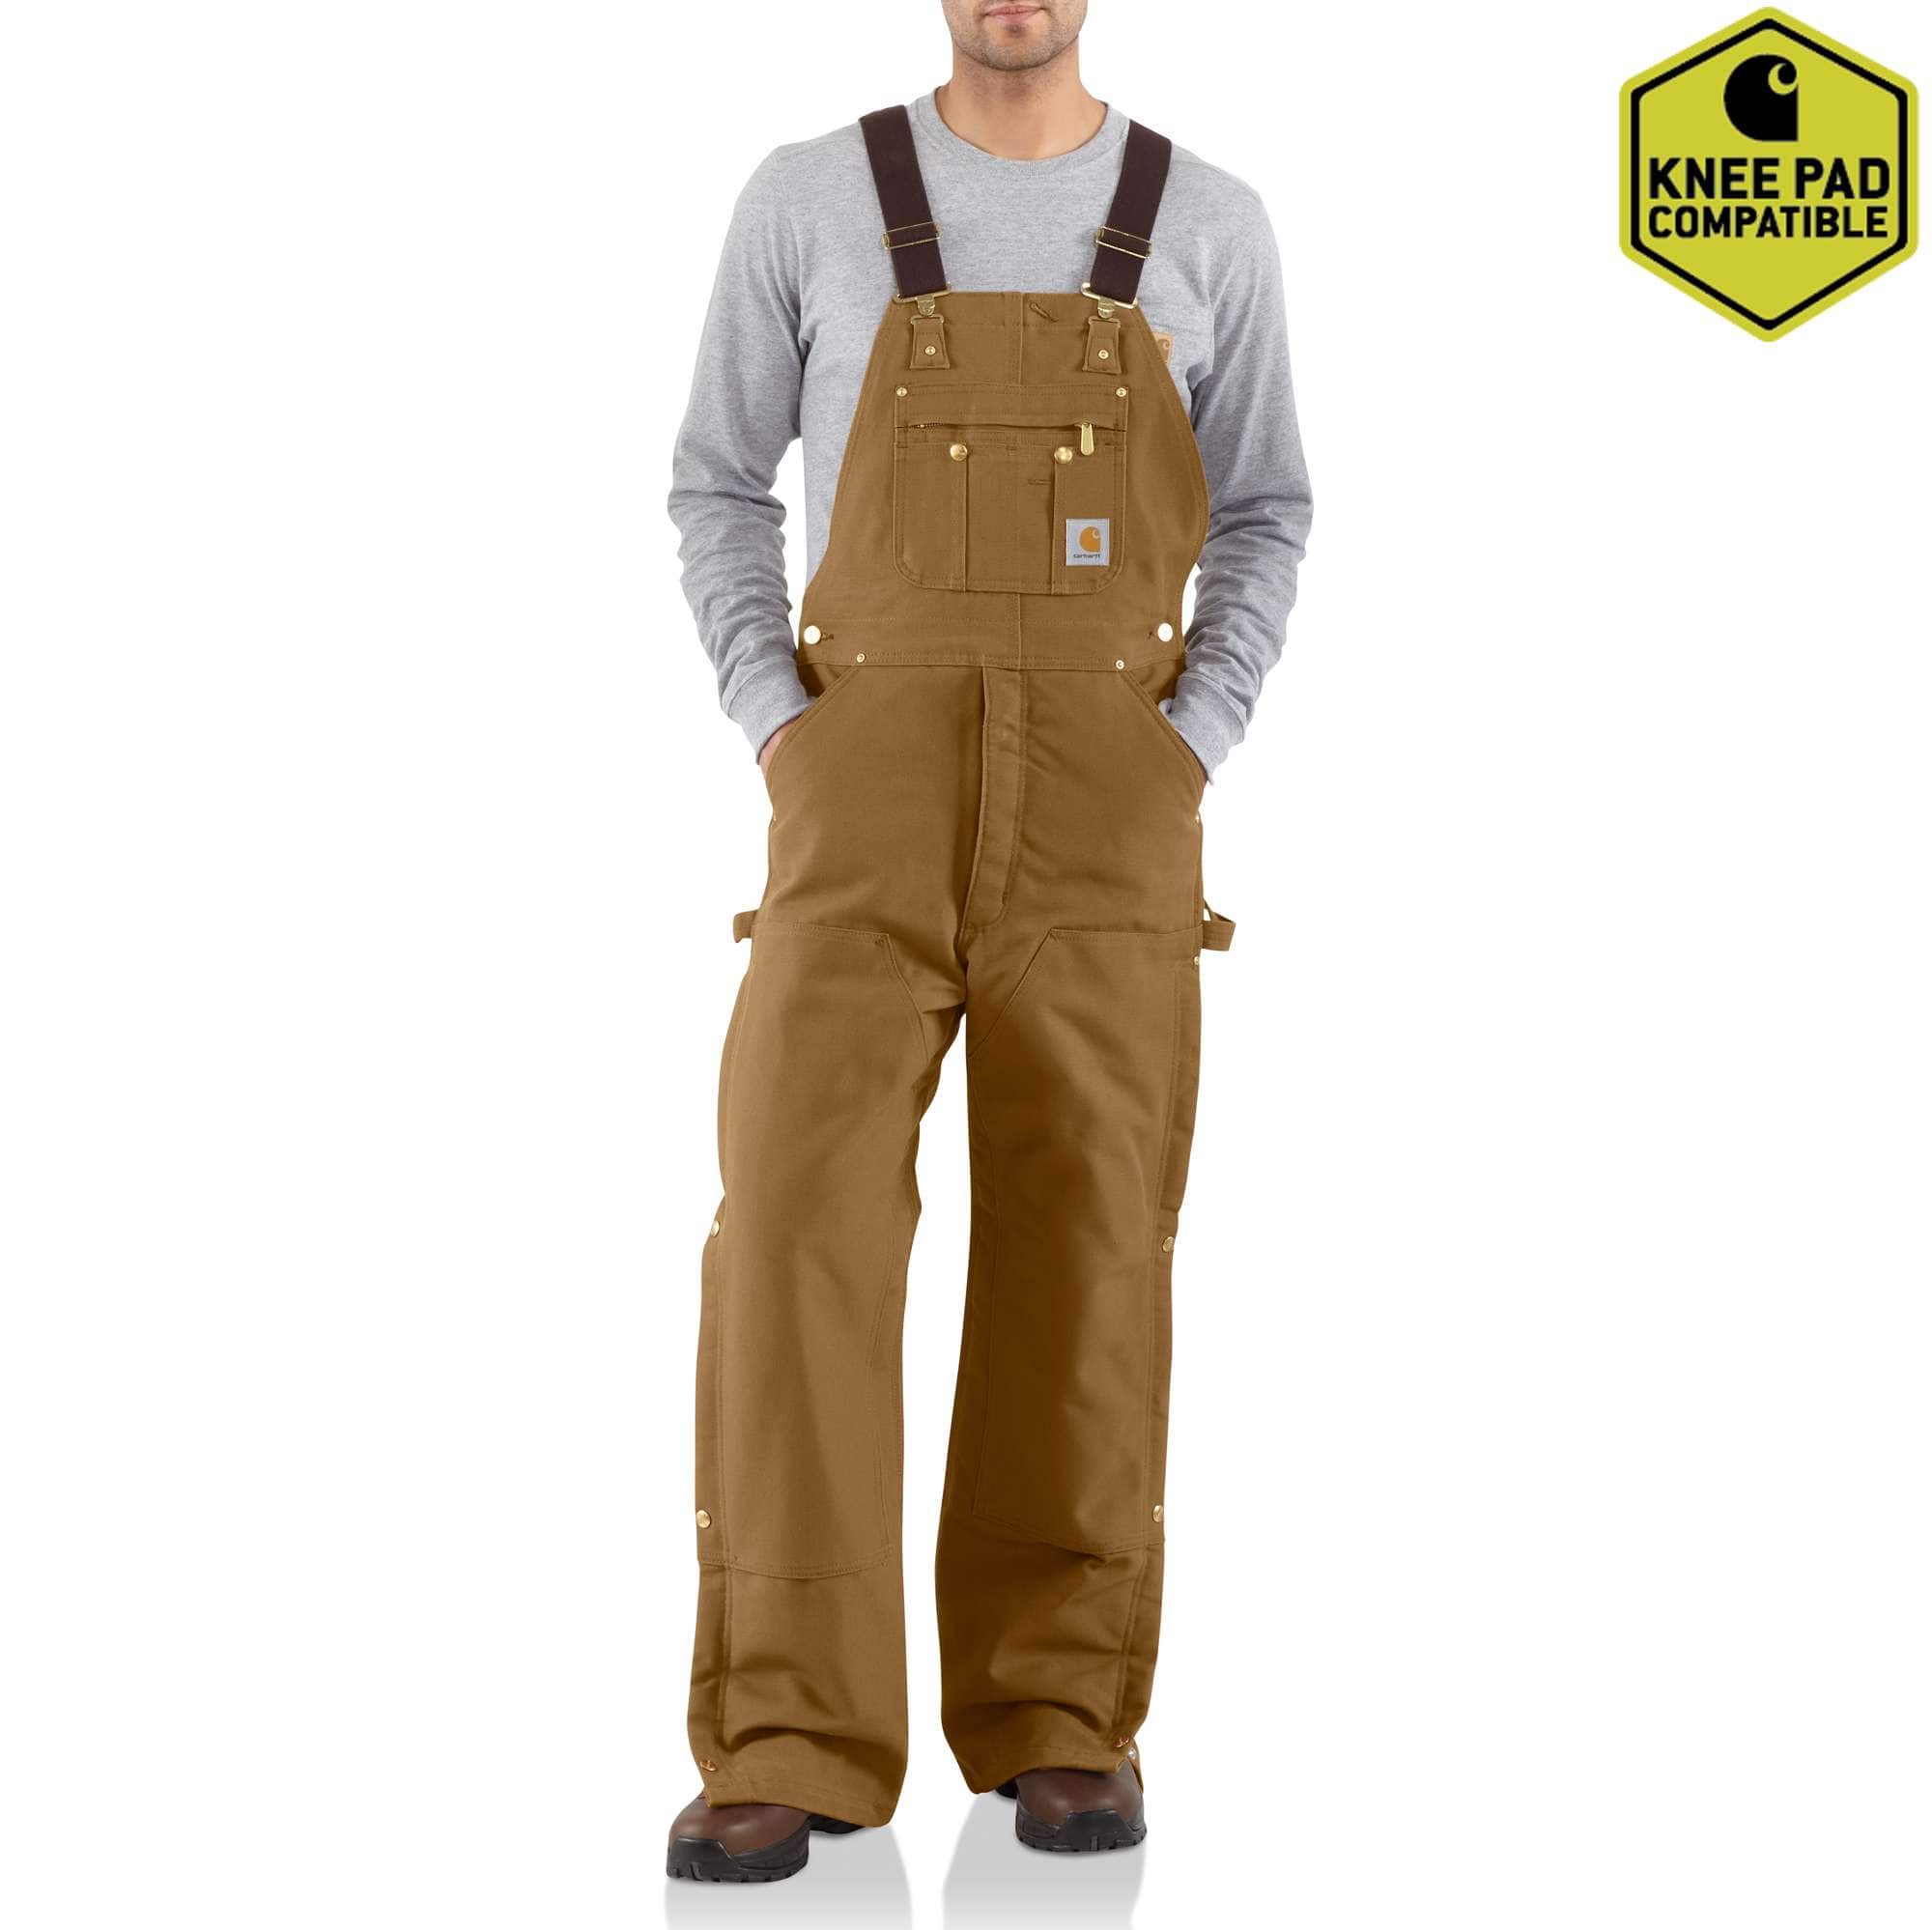 carhartt big and tall jeans